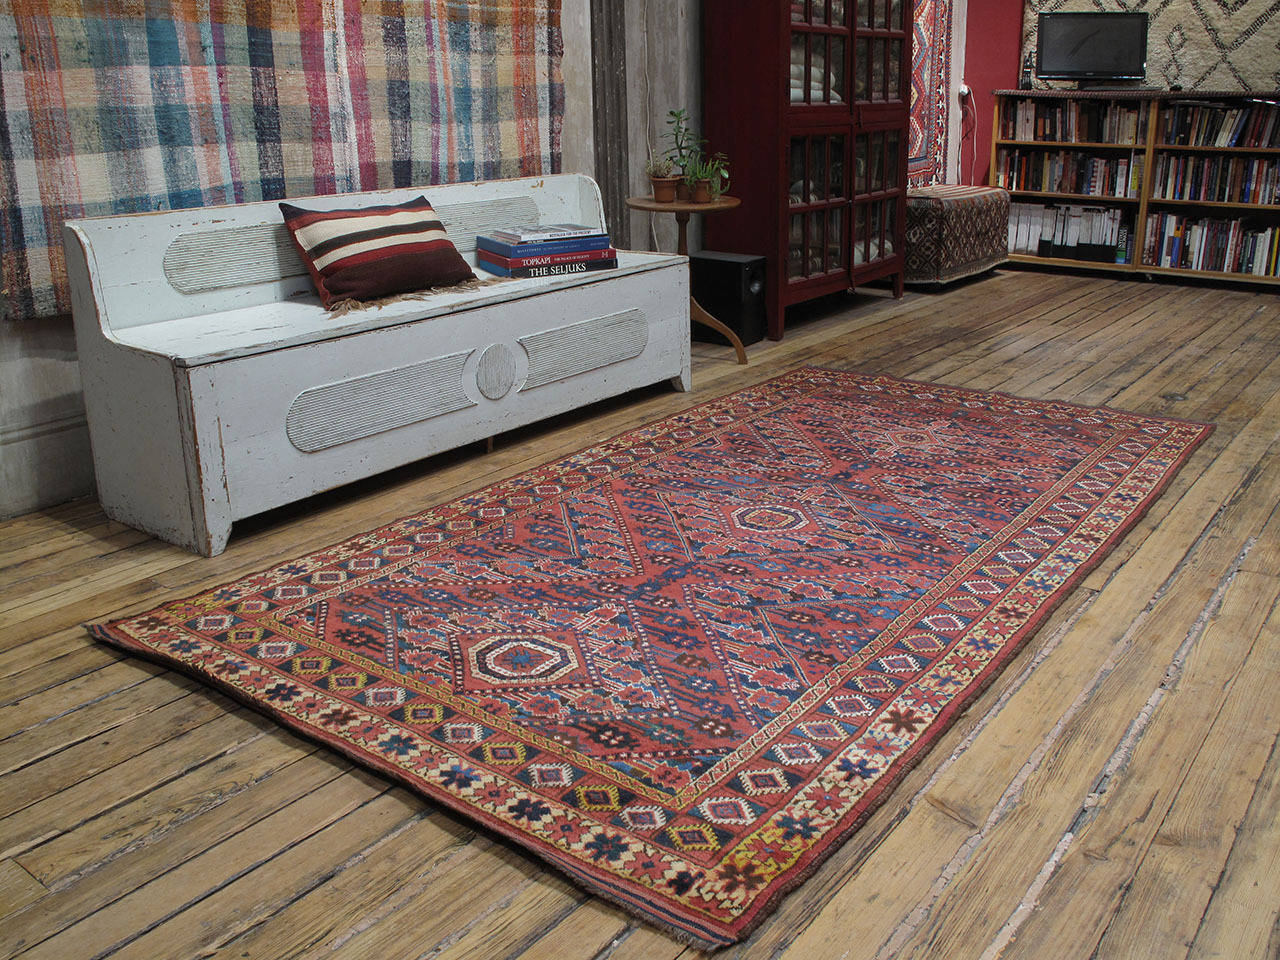 Antique Beshir Turkmen rug. A highly collectible antique rug, attributed to the Ersari Turkmen tribes in Central Asia, in a more ornate style often referred to as 